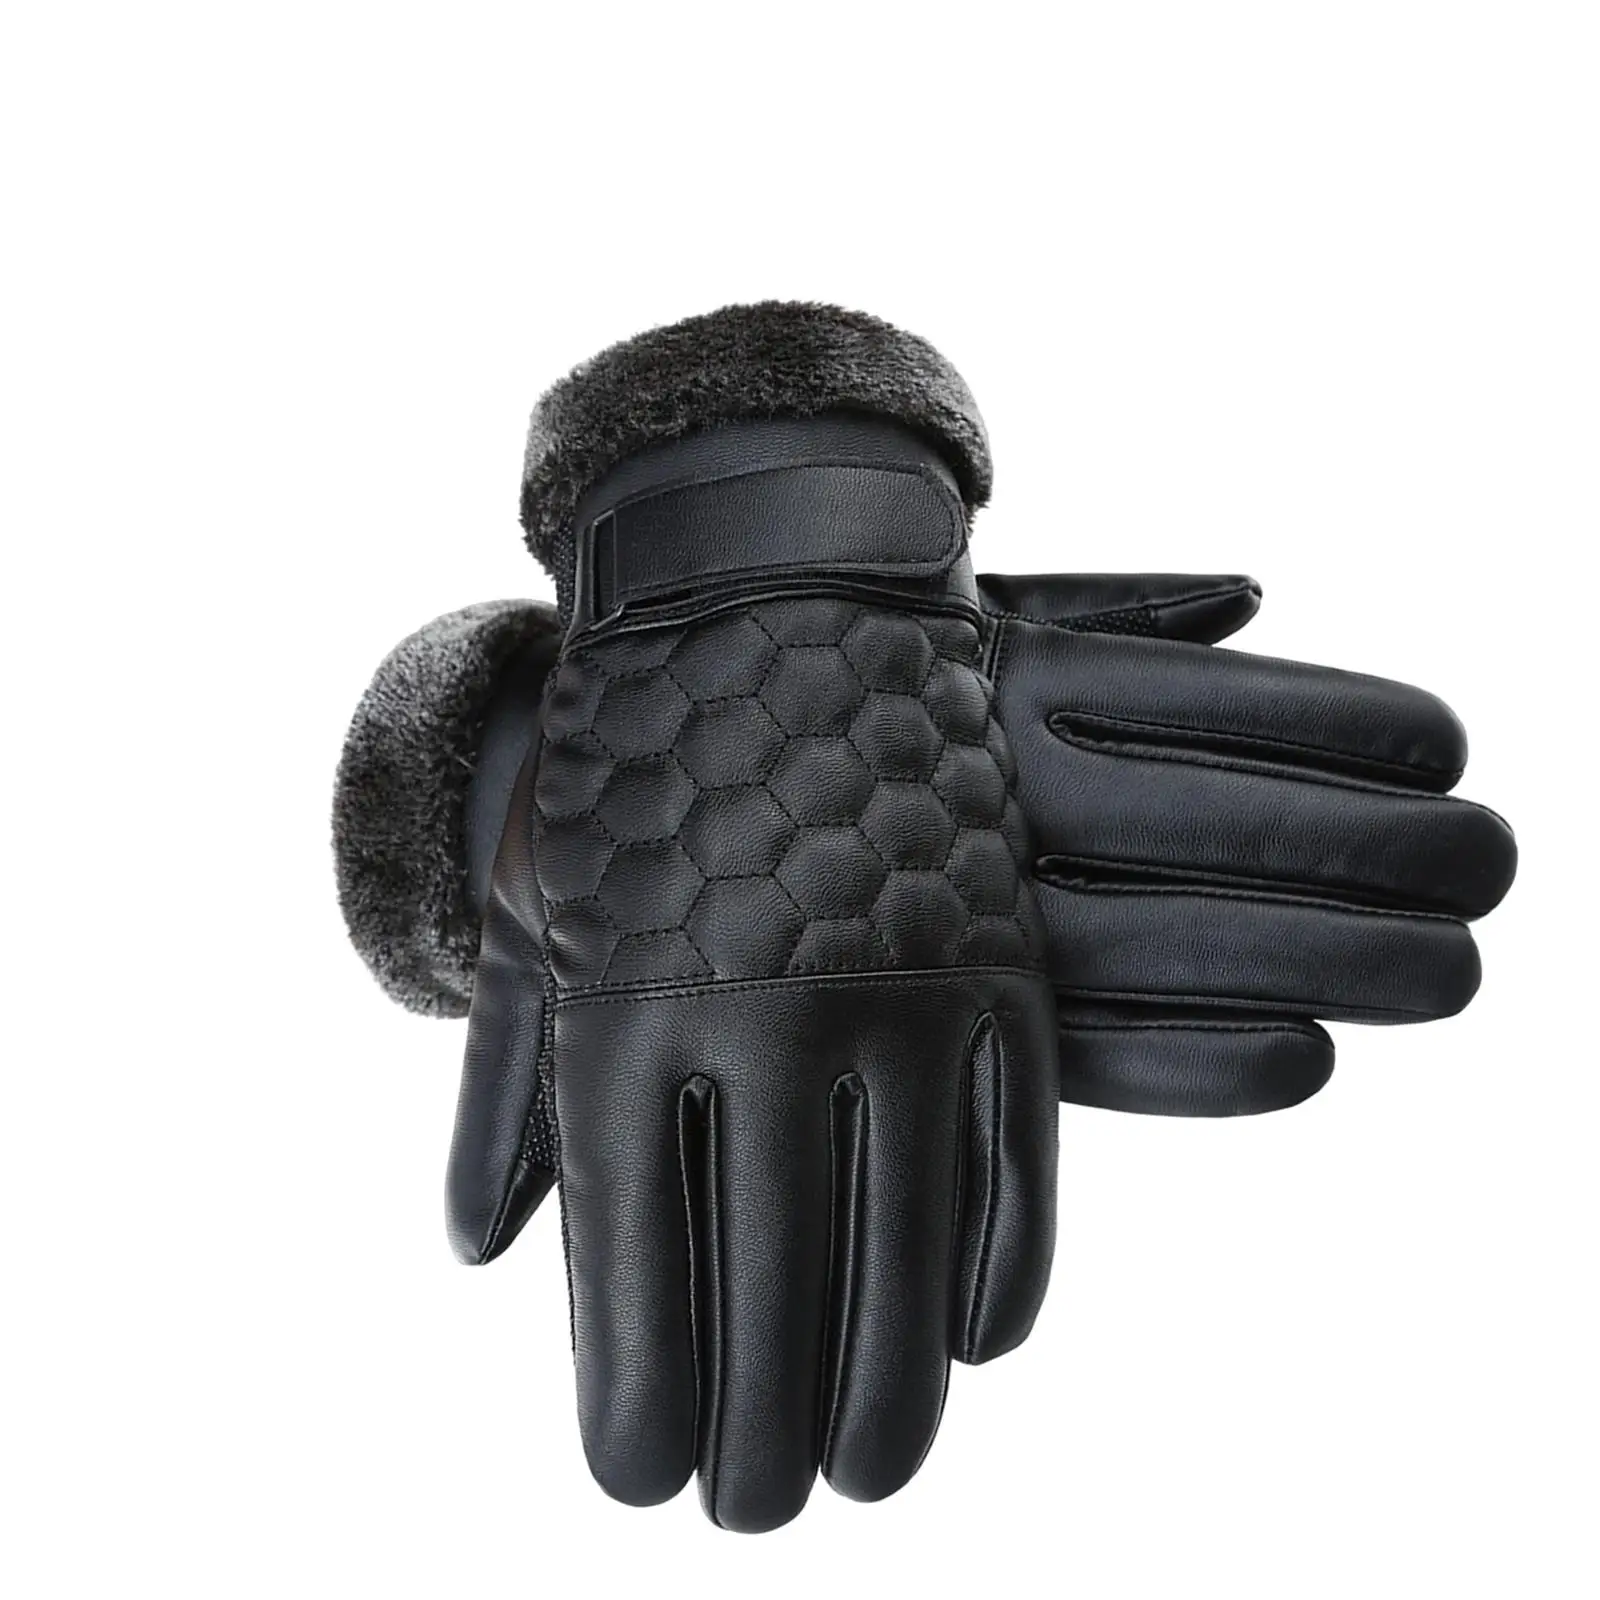 Winter Gloves Touchscreen Waterproof Warm Gloves for Cycling Outdoor Typing